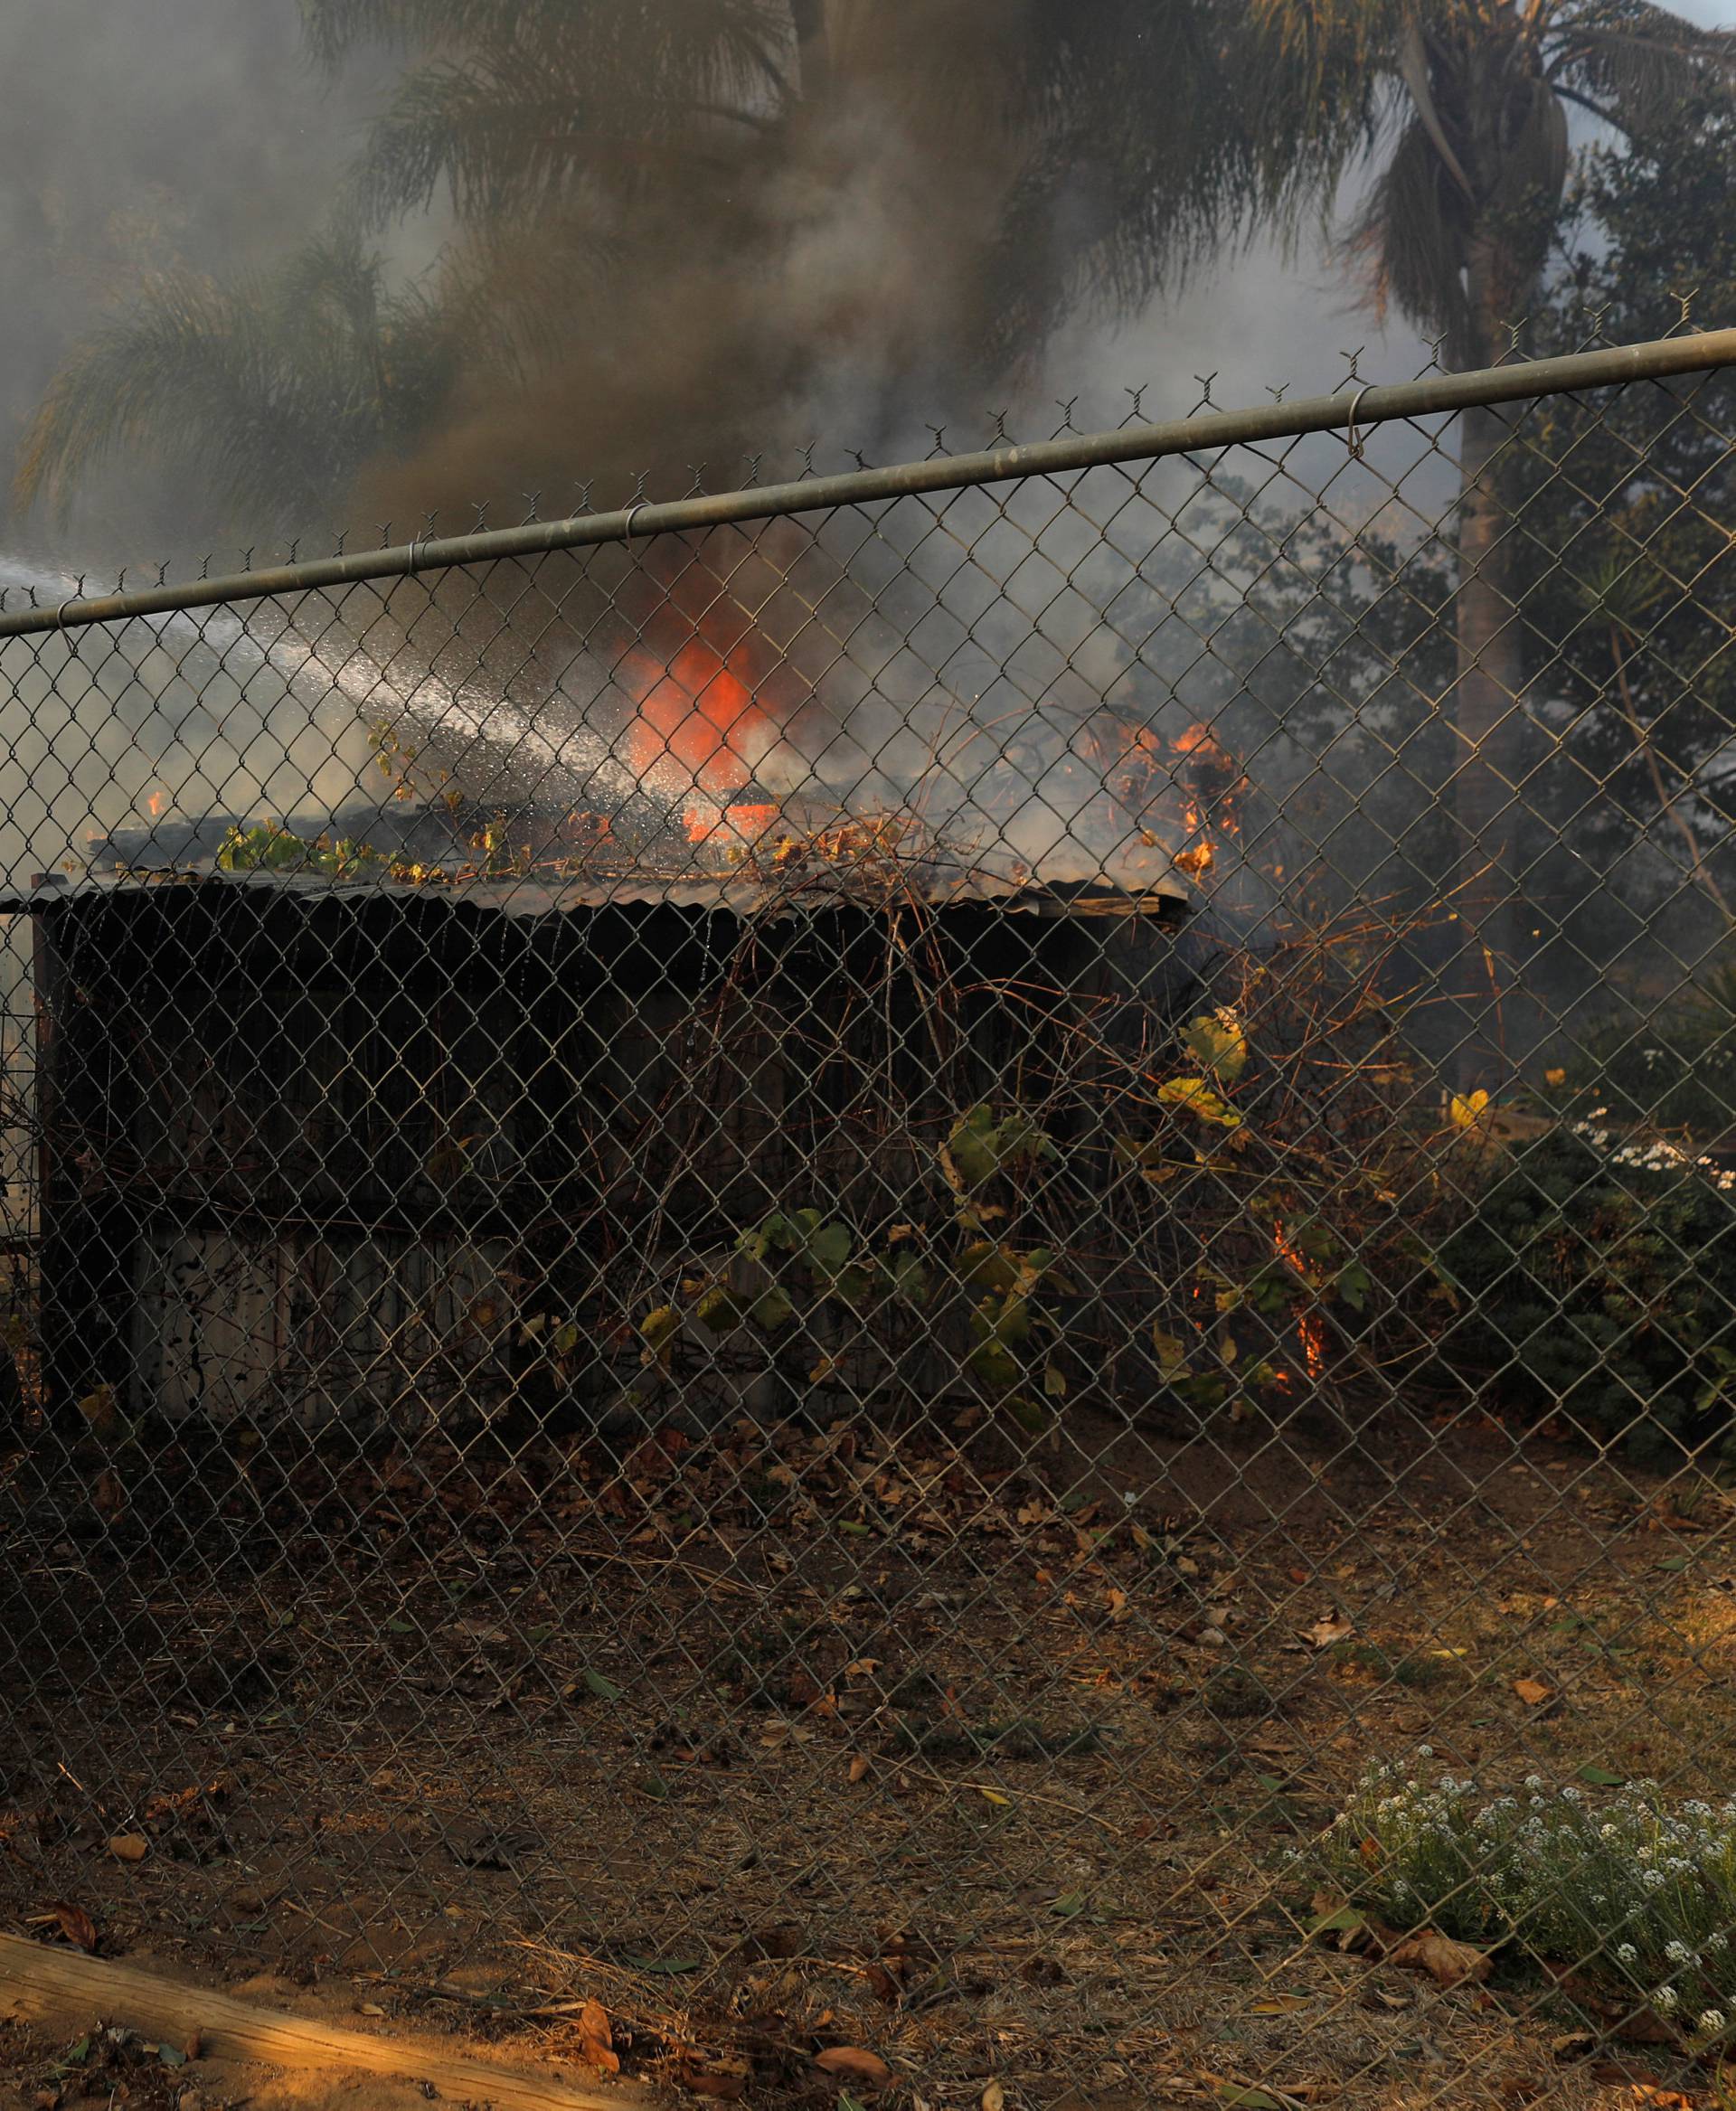 Firefighters jump a fence to try and save a burning home from the Lilac Fire, a fast moving wild fire, came through Bonsall, California